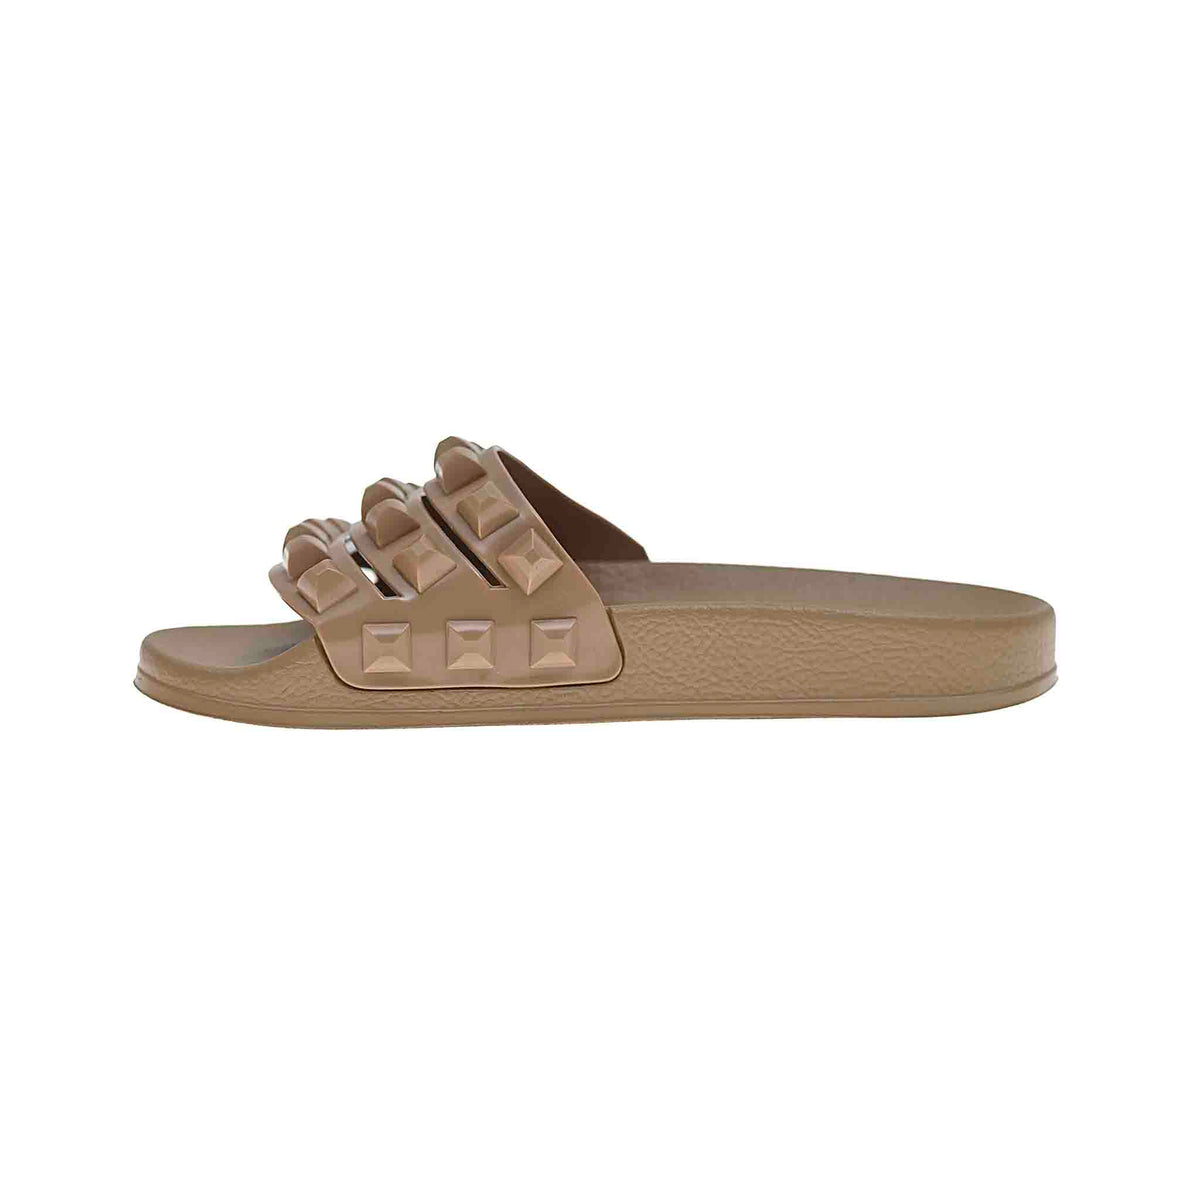 Nude platform slide sandals from carmen sol, eco chic vegan 100% recyclable perfect for beach lovers.